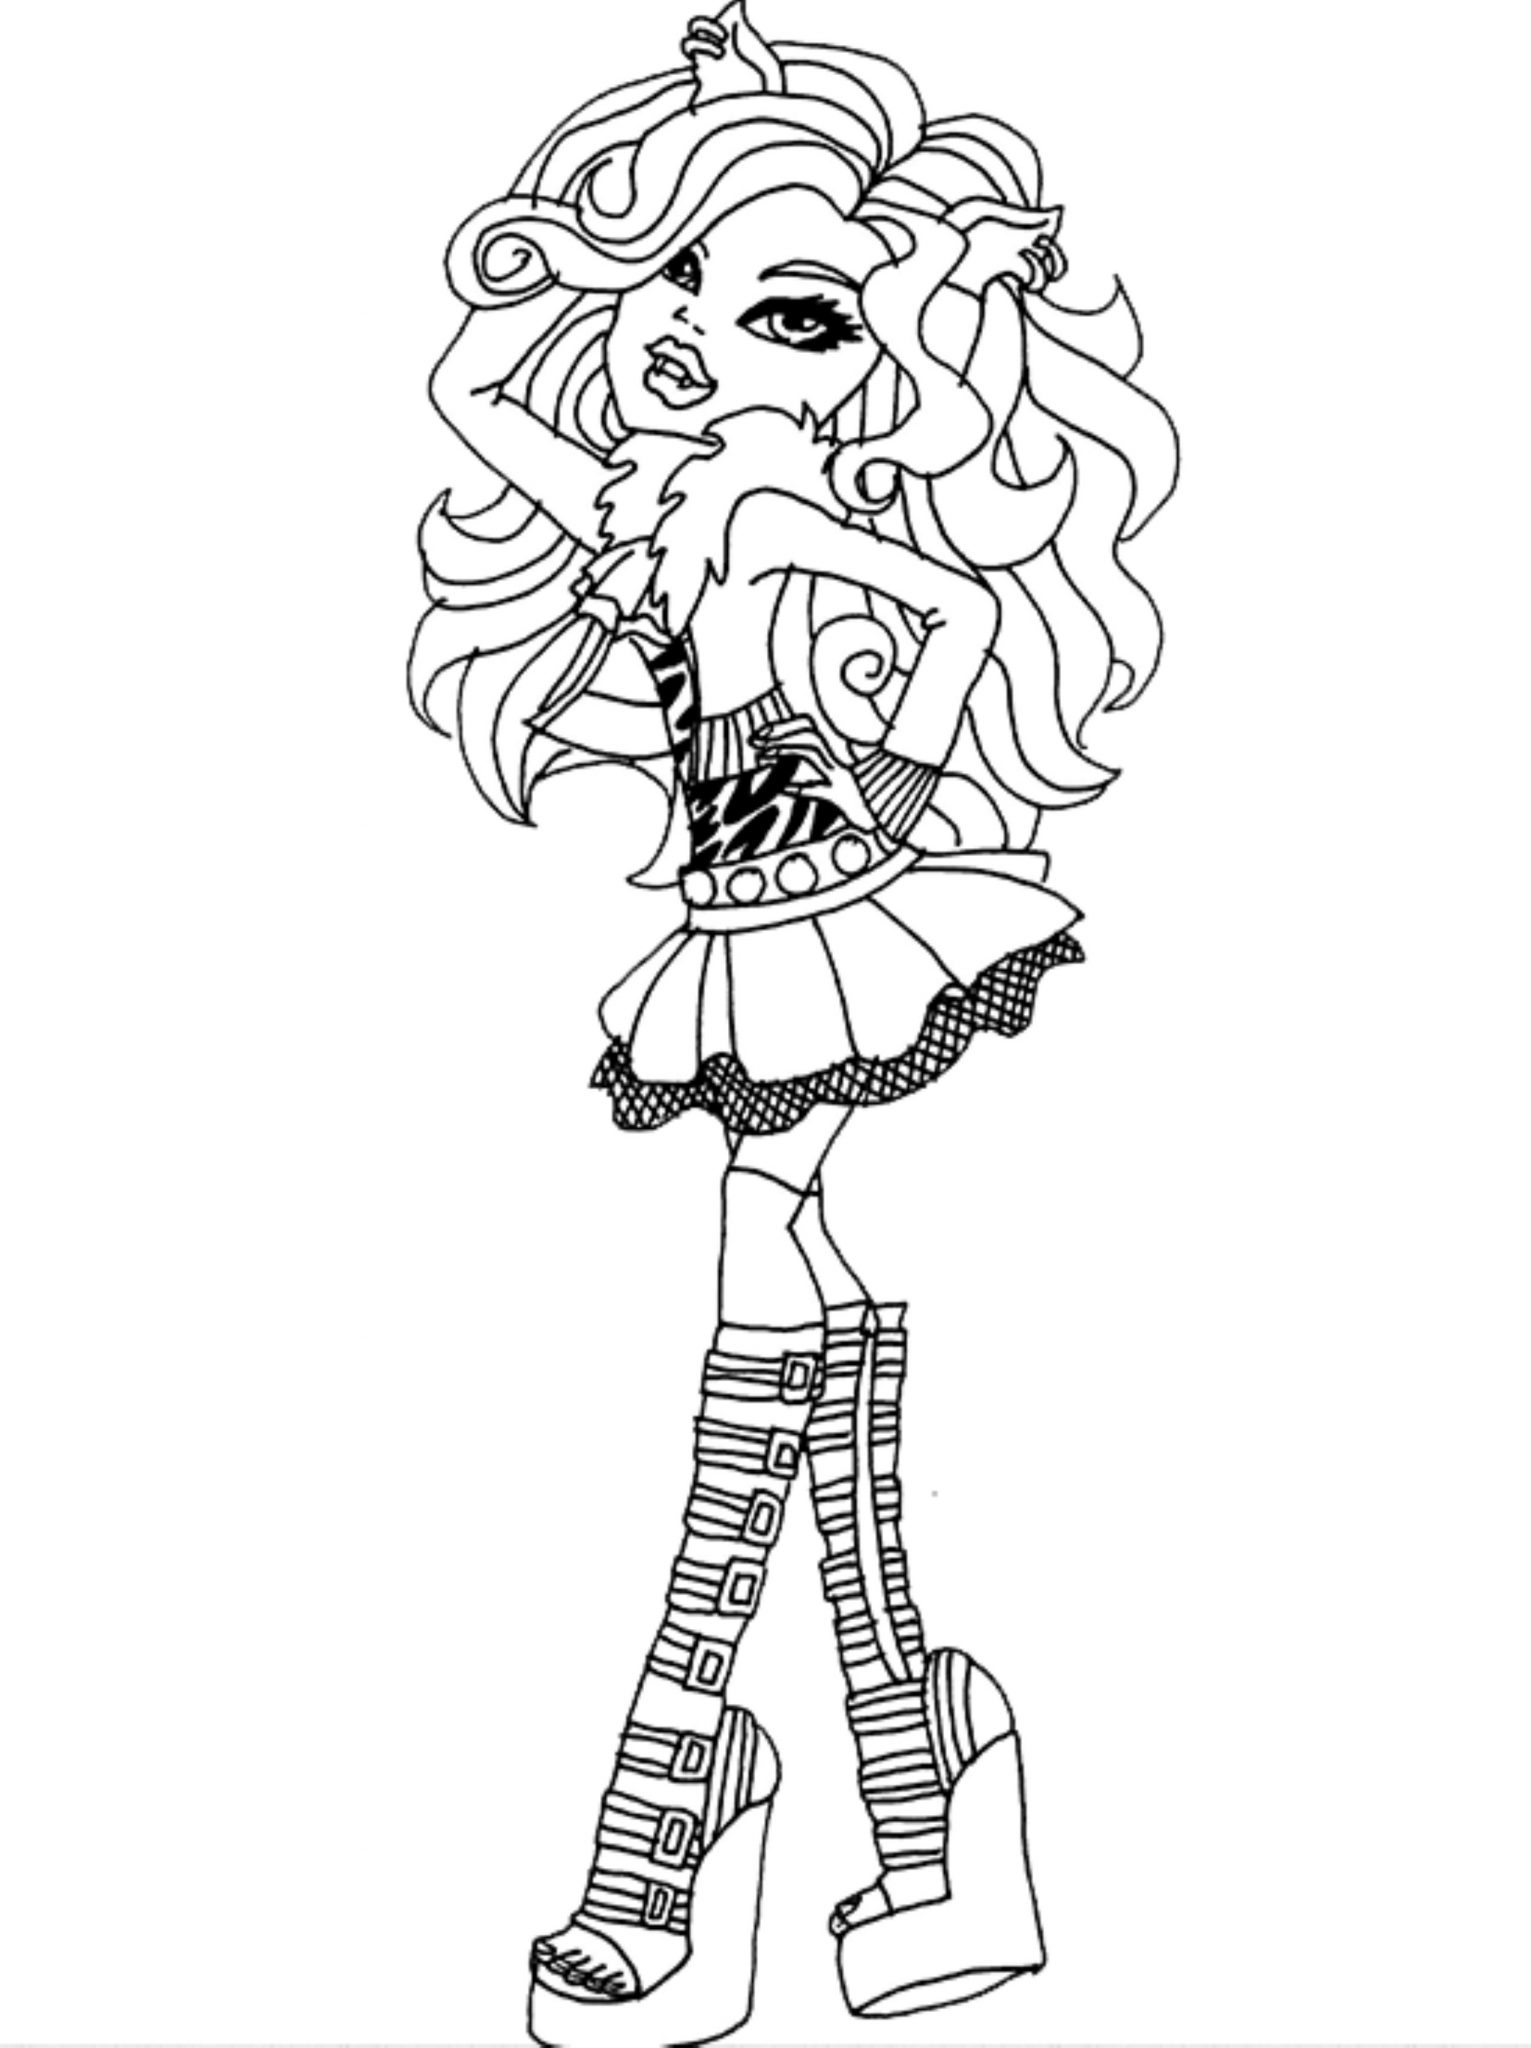 print-download-monster-high-coloring-pages-printable-for-your-kids